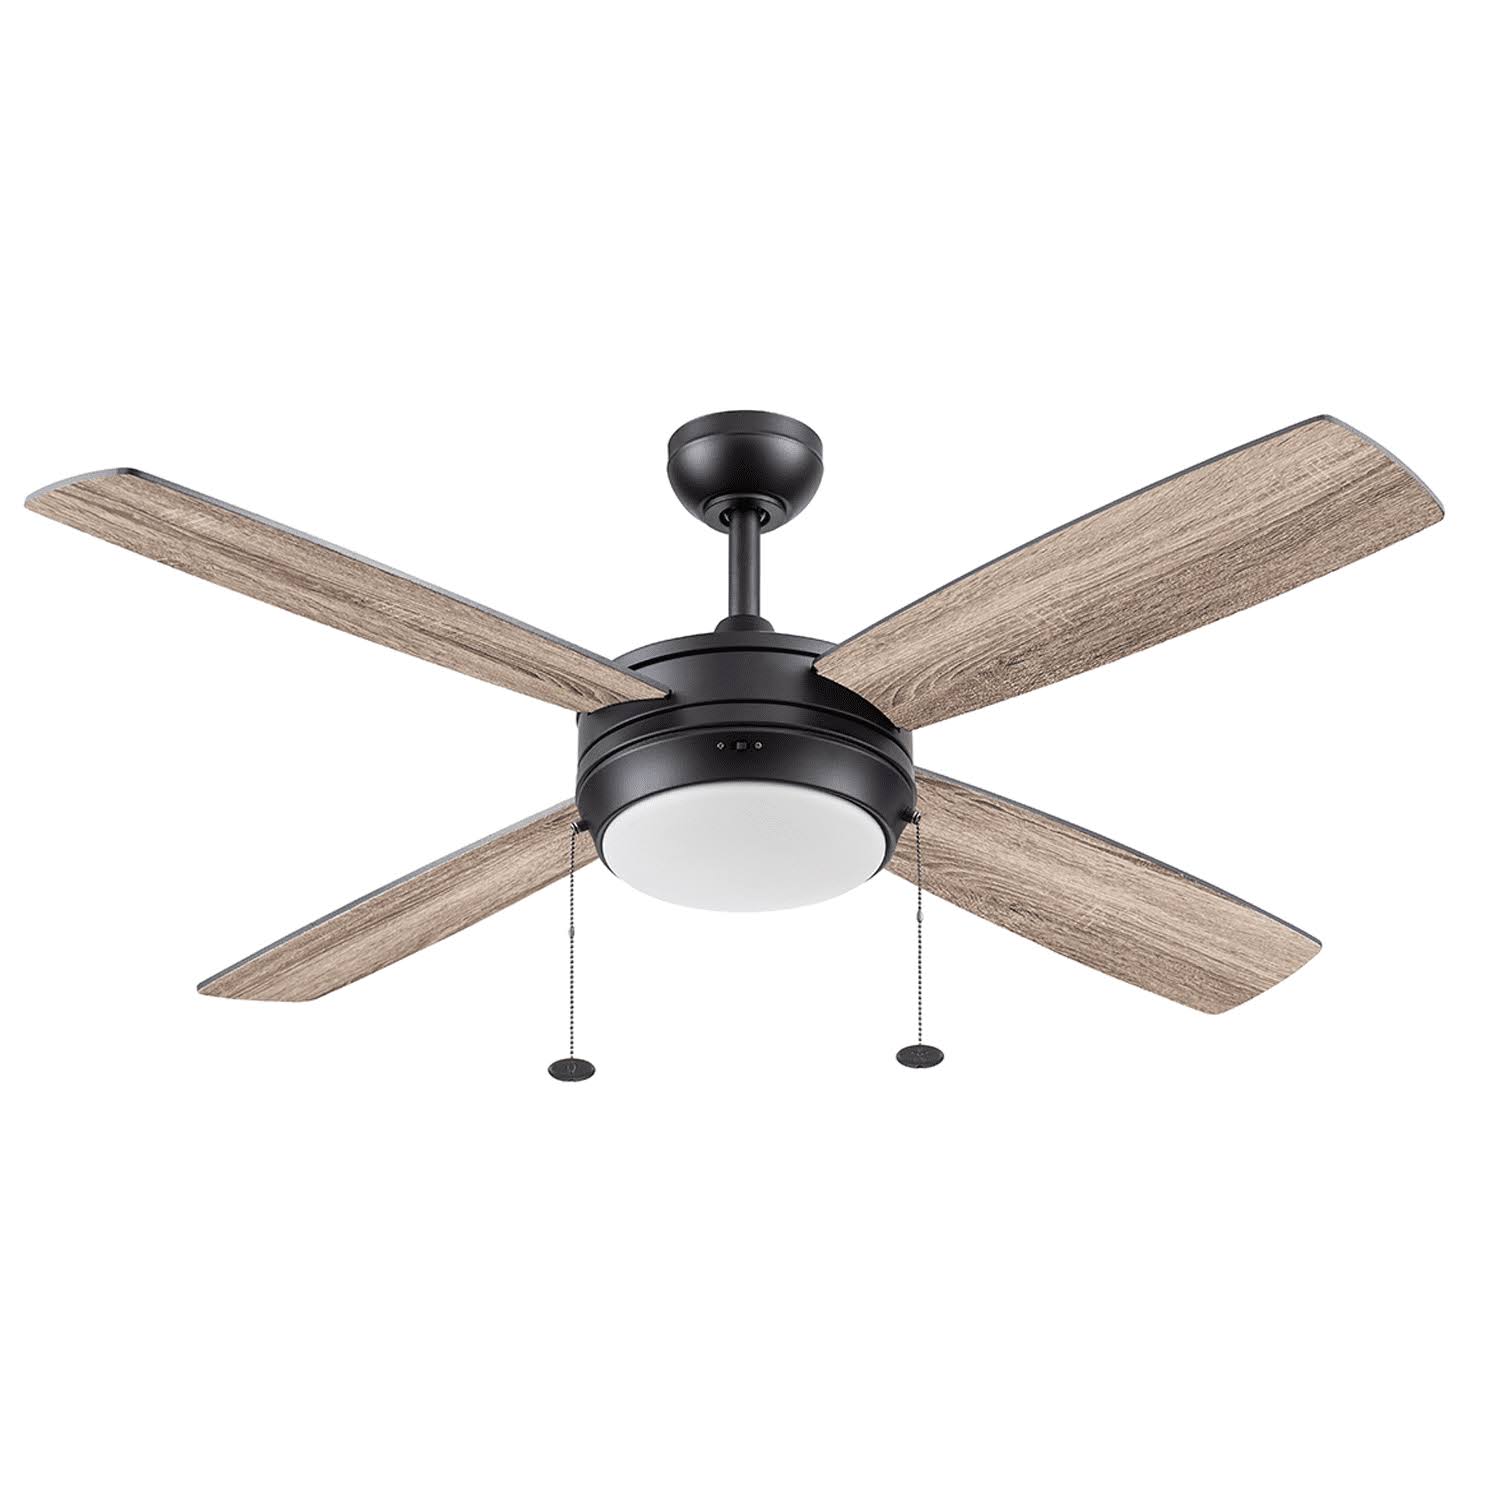 52" Prominence Home Kailani Indoor Modern Ceiling Fan, Matte Black